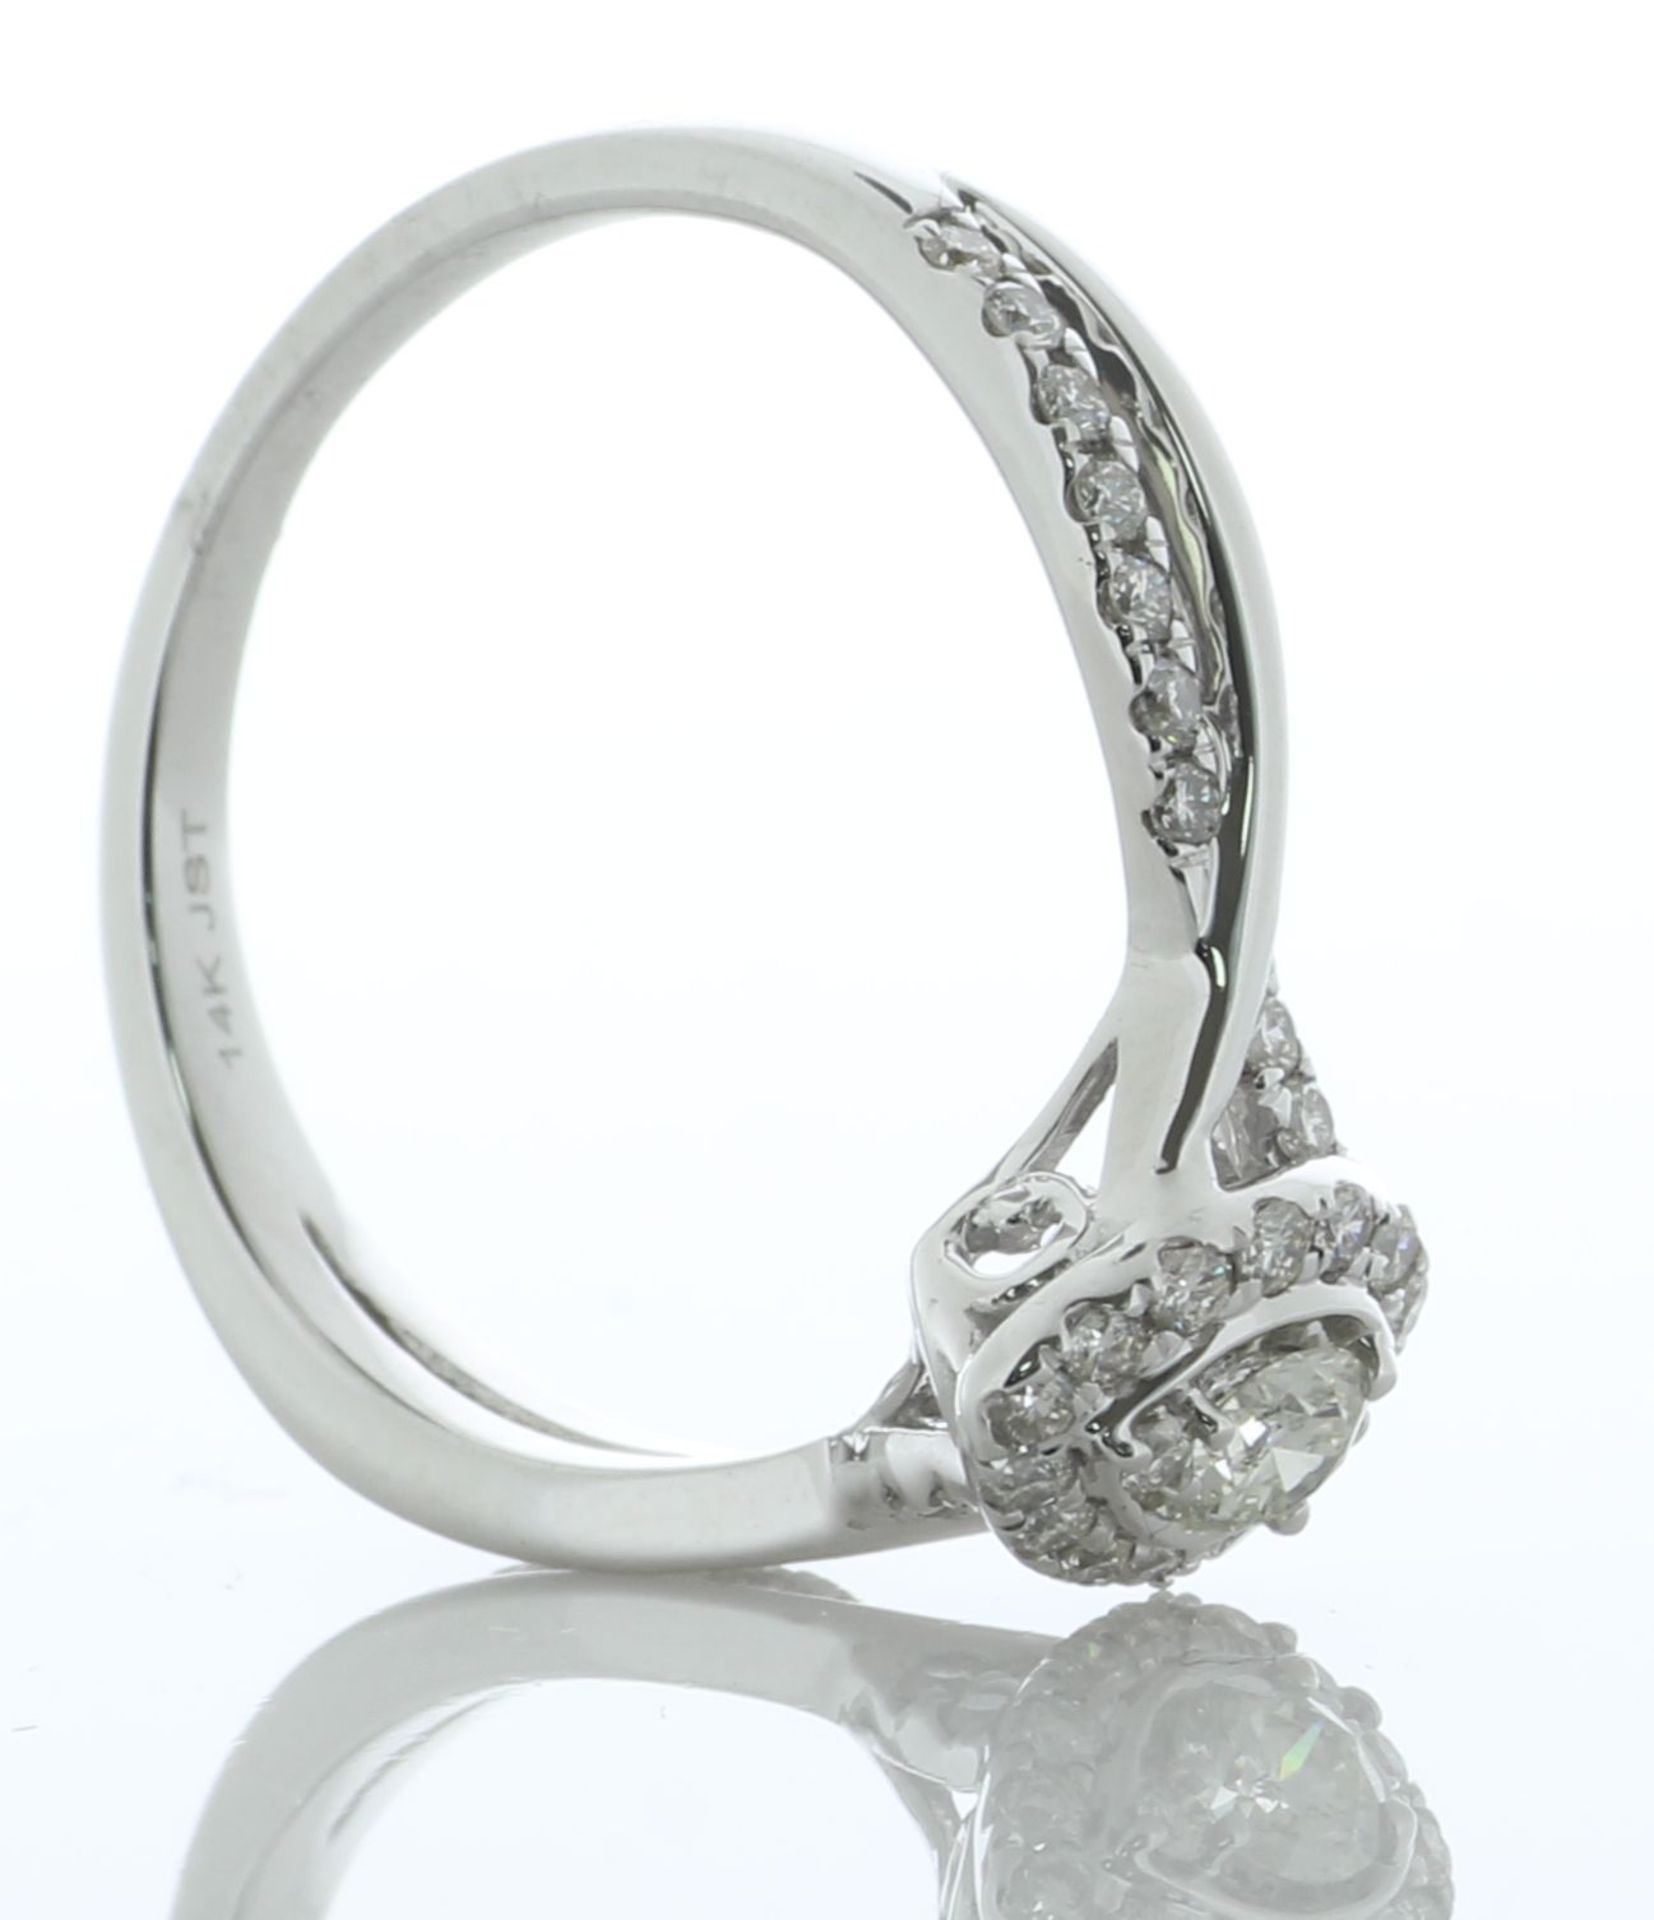 14ct Gold Illusion Halo Diamond Ring 0.75 Carats - Valued By AGI £3,110.00 - One round brilliant cut - Image 5 of 6